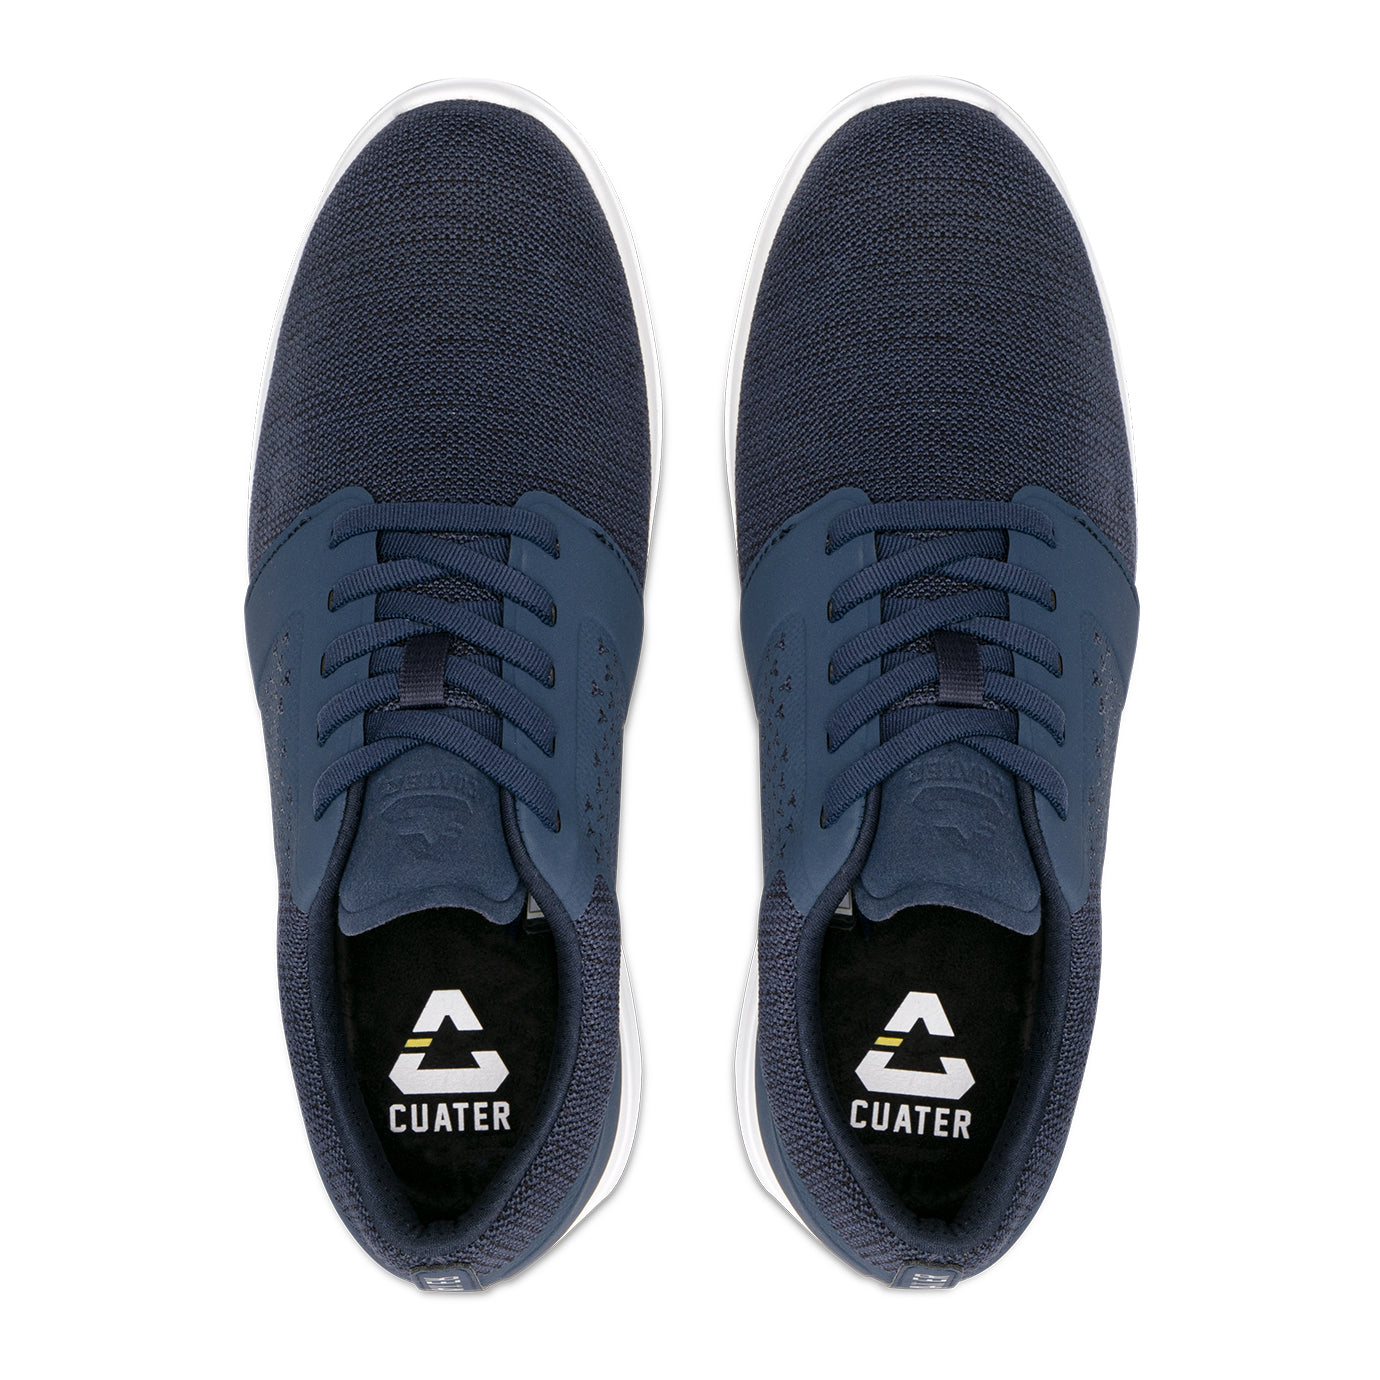 Cuater The Money Maker Golf Shoes 4MR216 Heather Mood Indigo | Function18